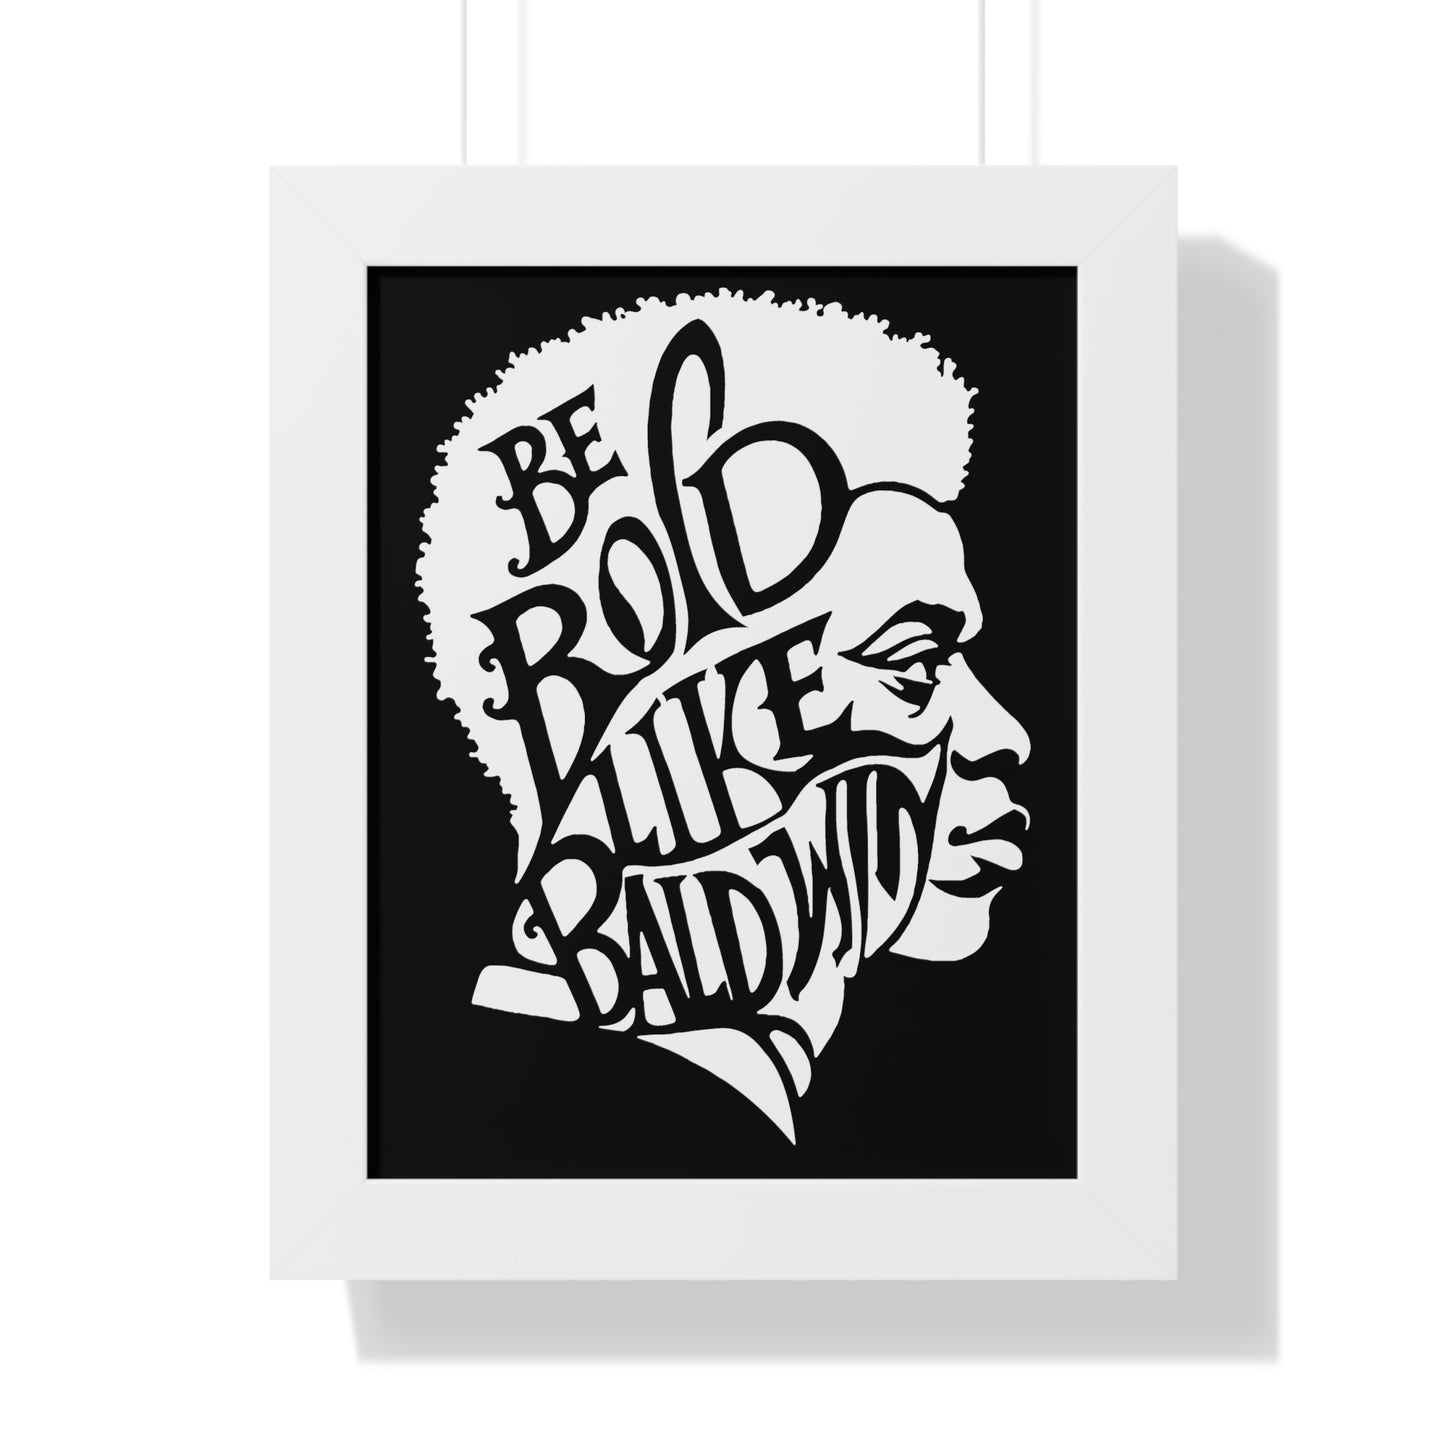 James Baldwin "Be Bold" Framed Wall Poster - White